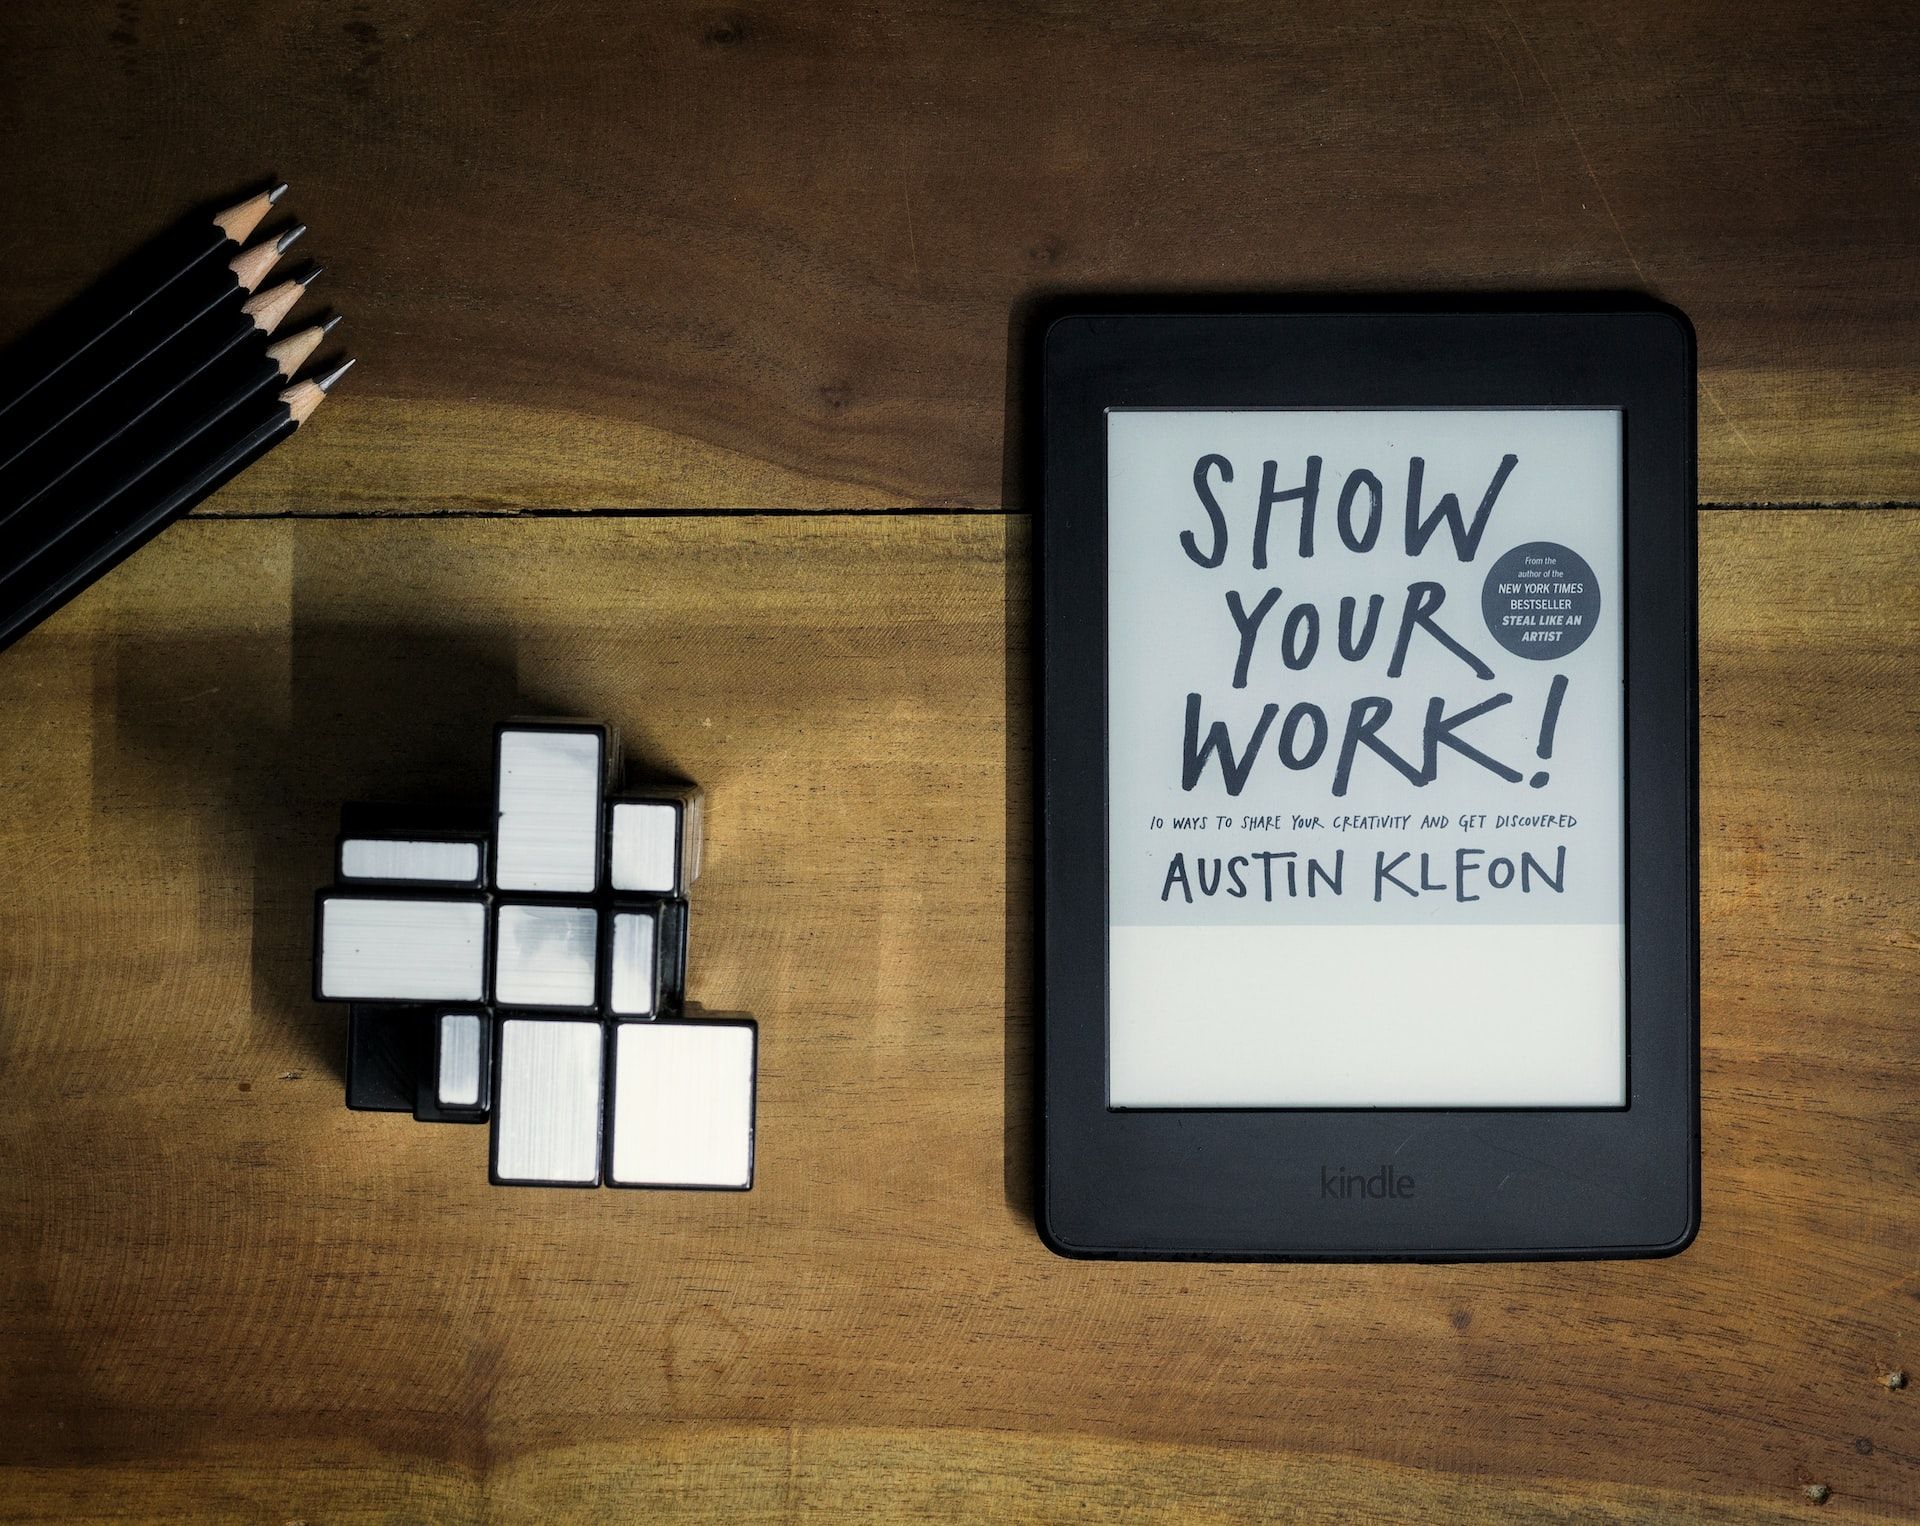 Amazon Kindle on a wooden table with Show Your Work open